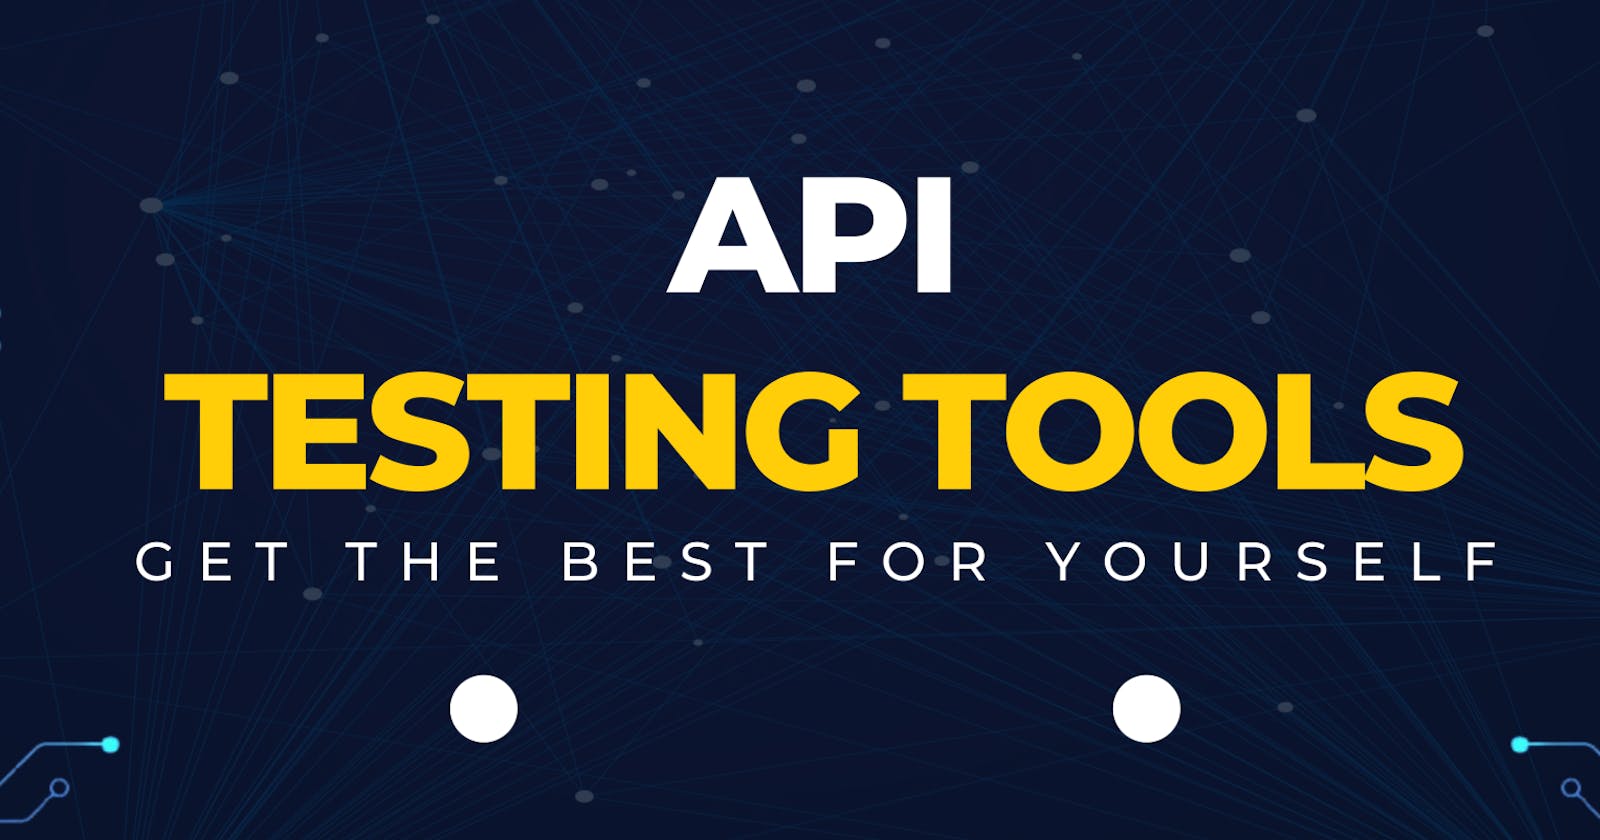 Test your APIs the Better Way